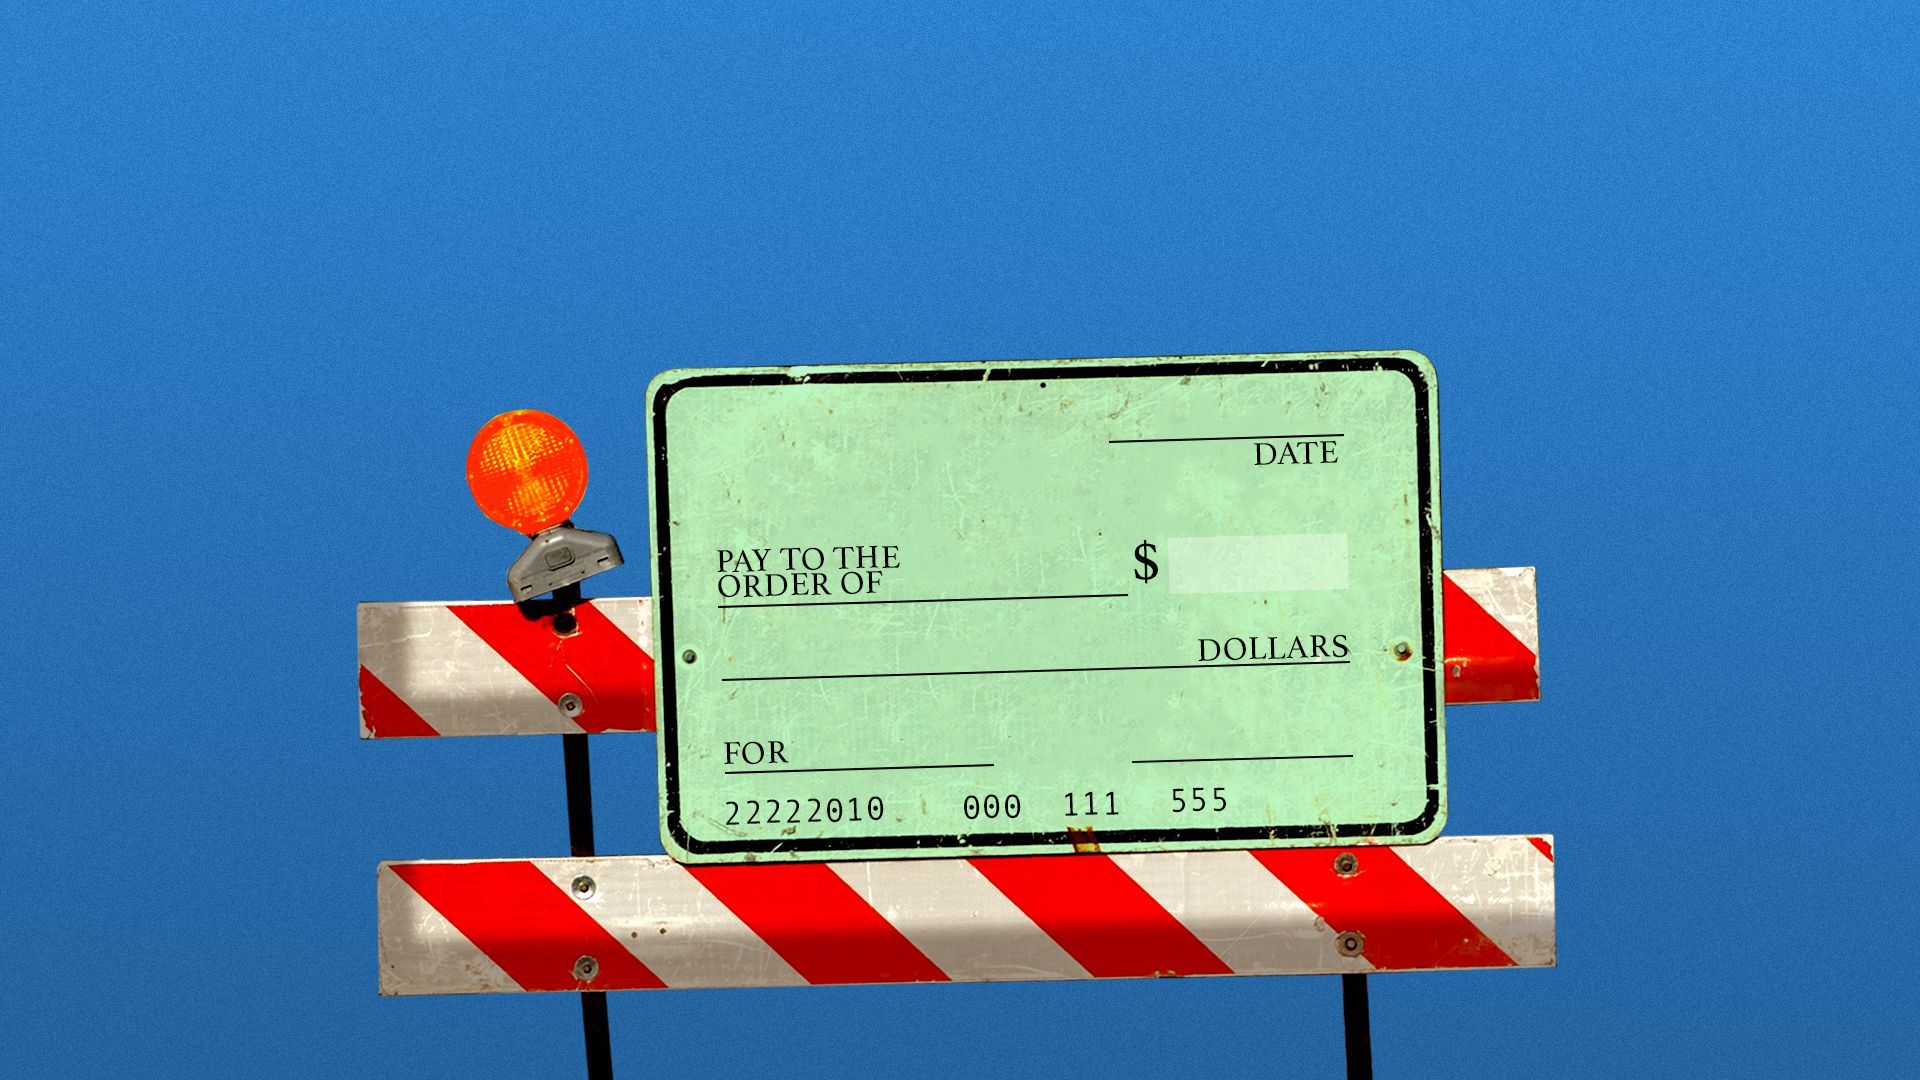 Illustration of a roadwork sign with a blank check